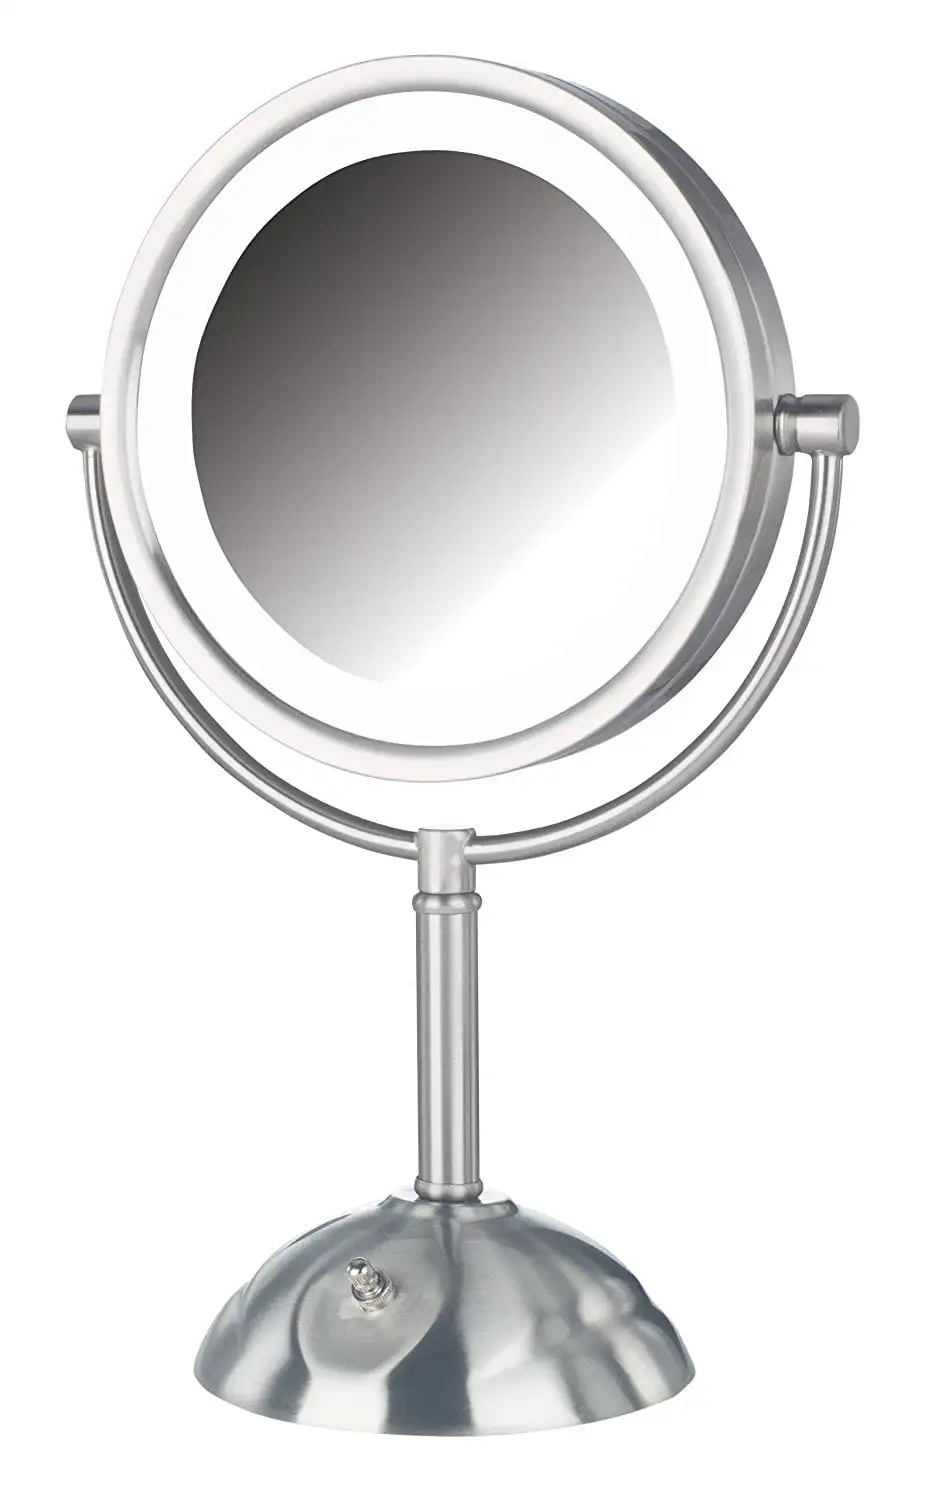 Jerdon HL8808NL 8.5-Inch Tabletop Two-Sided Swivel LED Lighted Vanity Mirror with 8x Magnification, 3-Light Settings, Nickel Fin